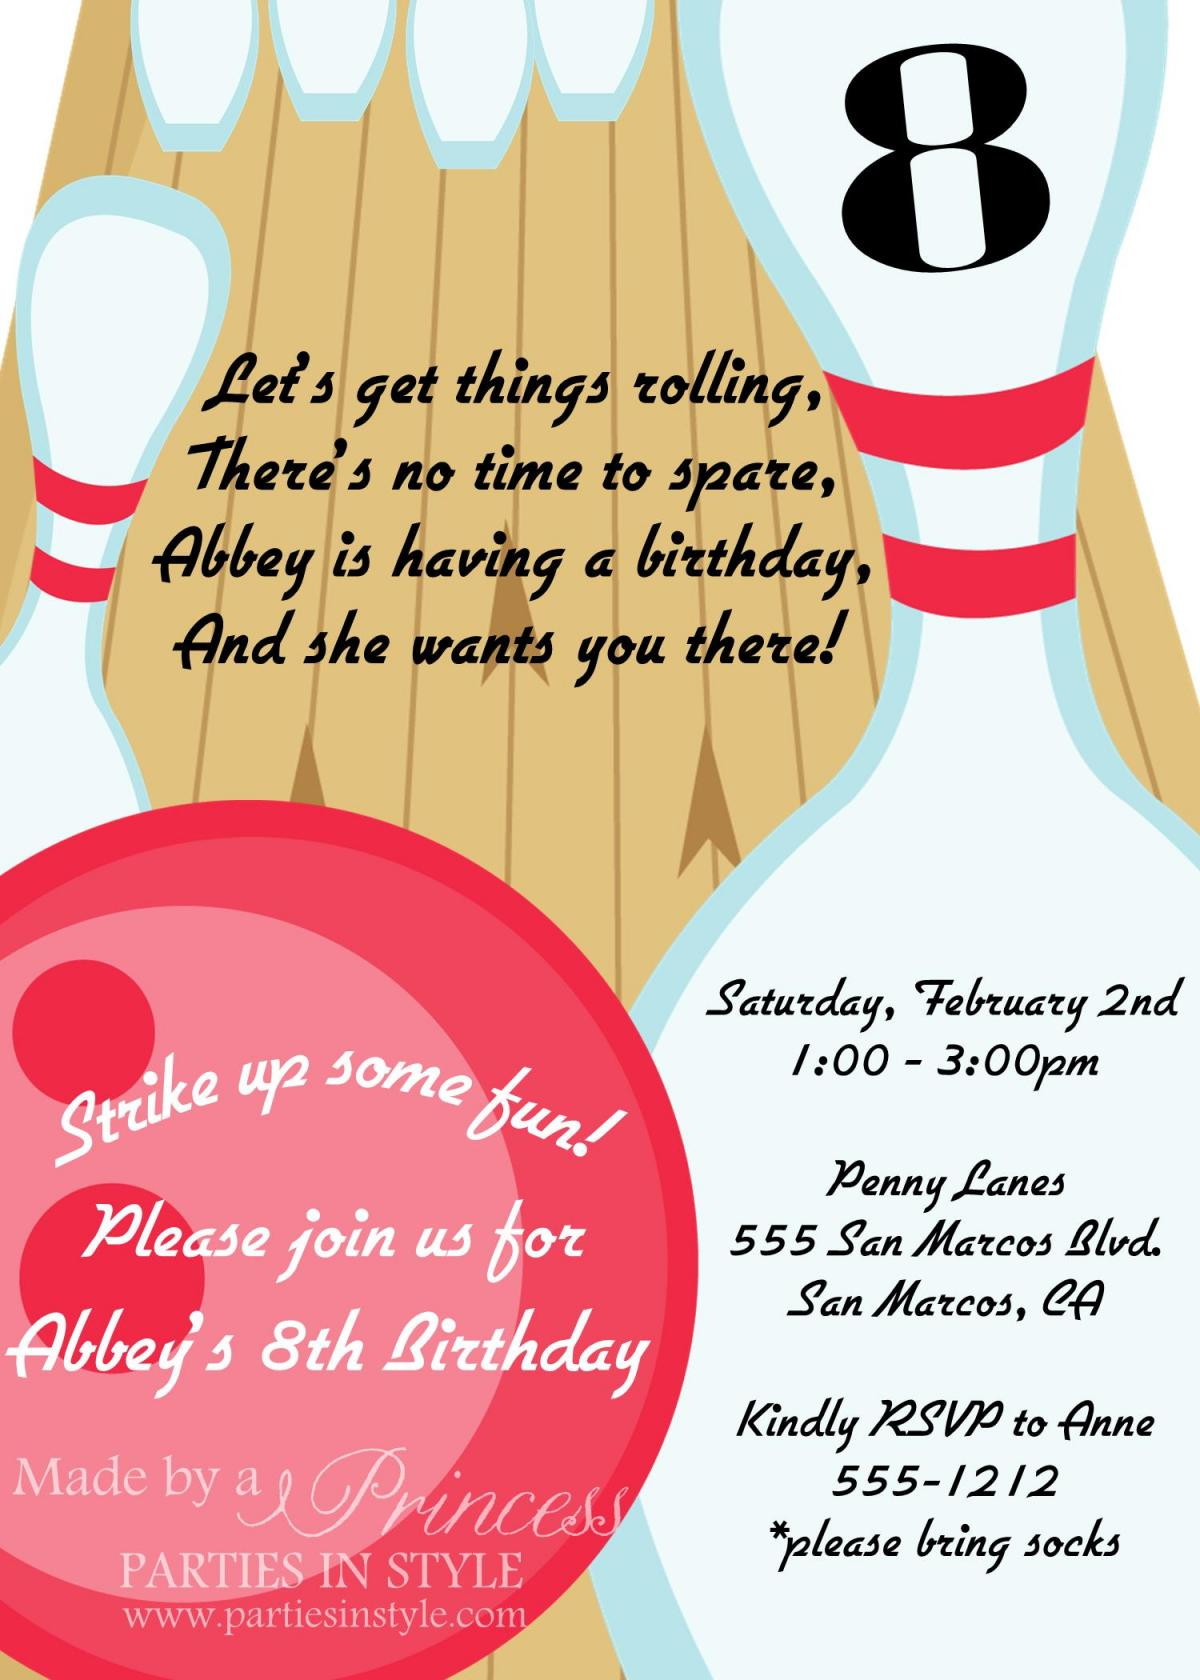 Free Printable Bowling Birthday Party Invitations
 Bowling Birthday Party Printable Invitation DIY Pink